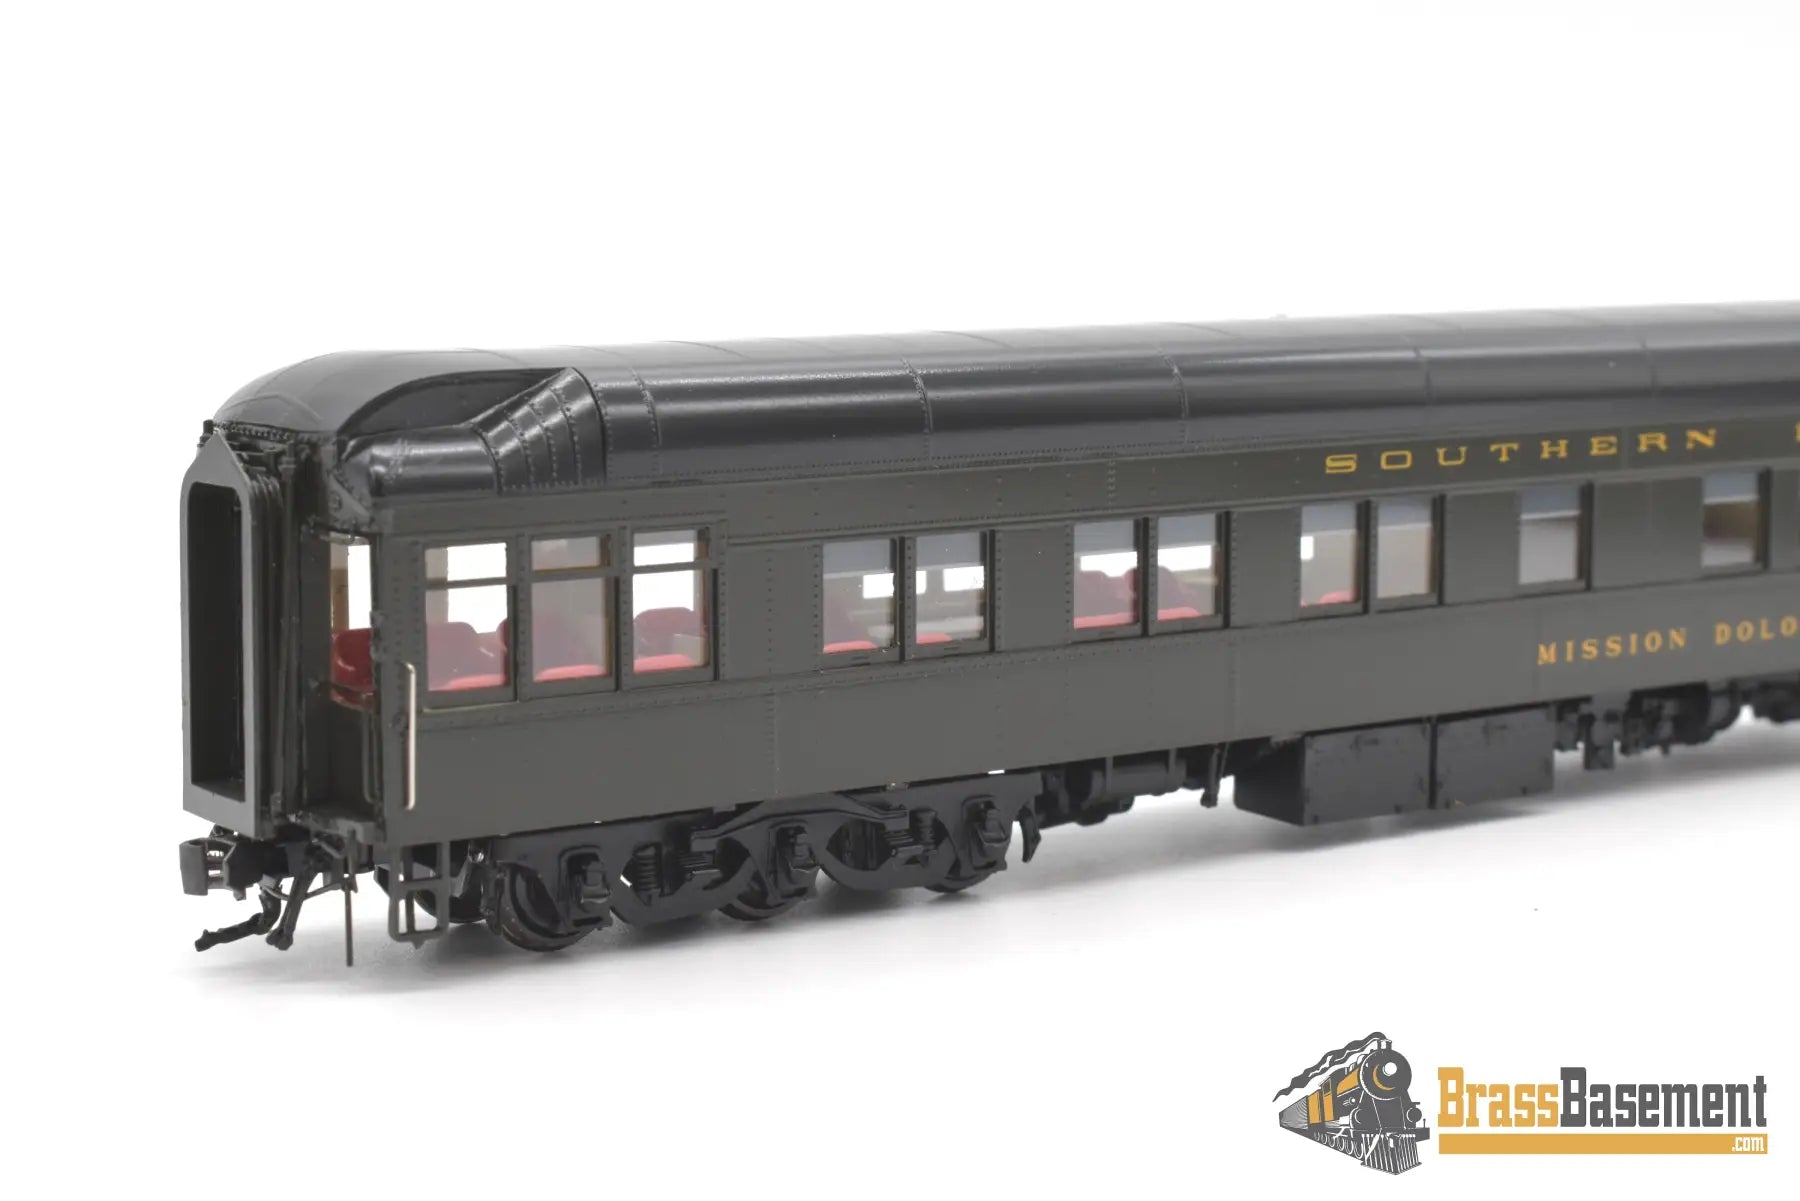 Ho Brass - Coach Yard 1181 Southern Pacific Sp ’Mission Delores’ 6 - 2 Lounge Sunroom